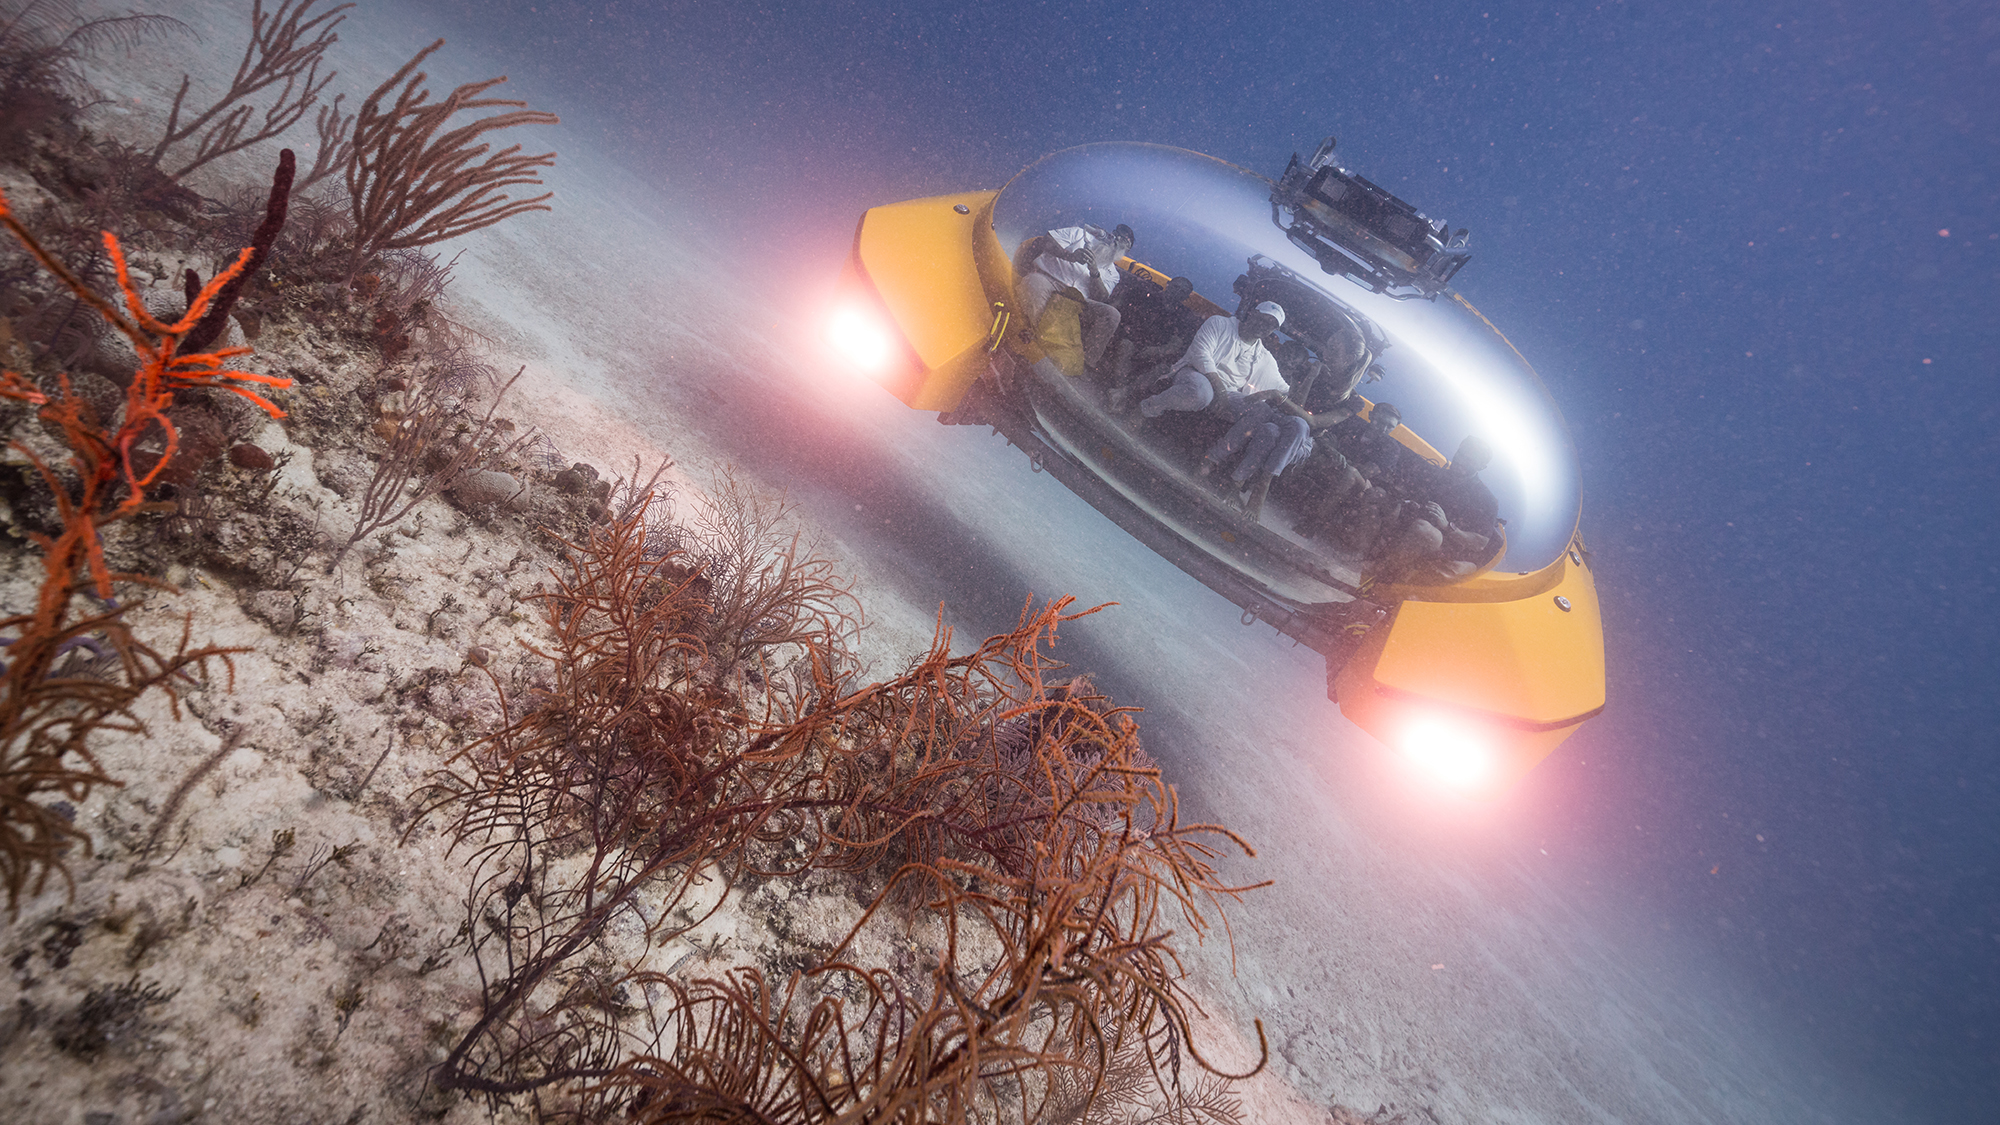 Eight passengers and a pilot can dive up to 200 meters in Triton’s new luxury submersible.